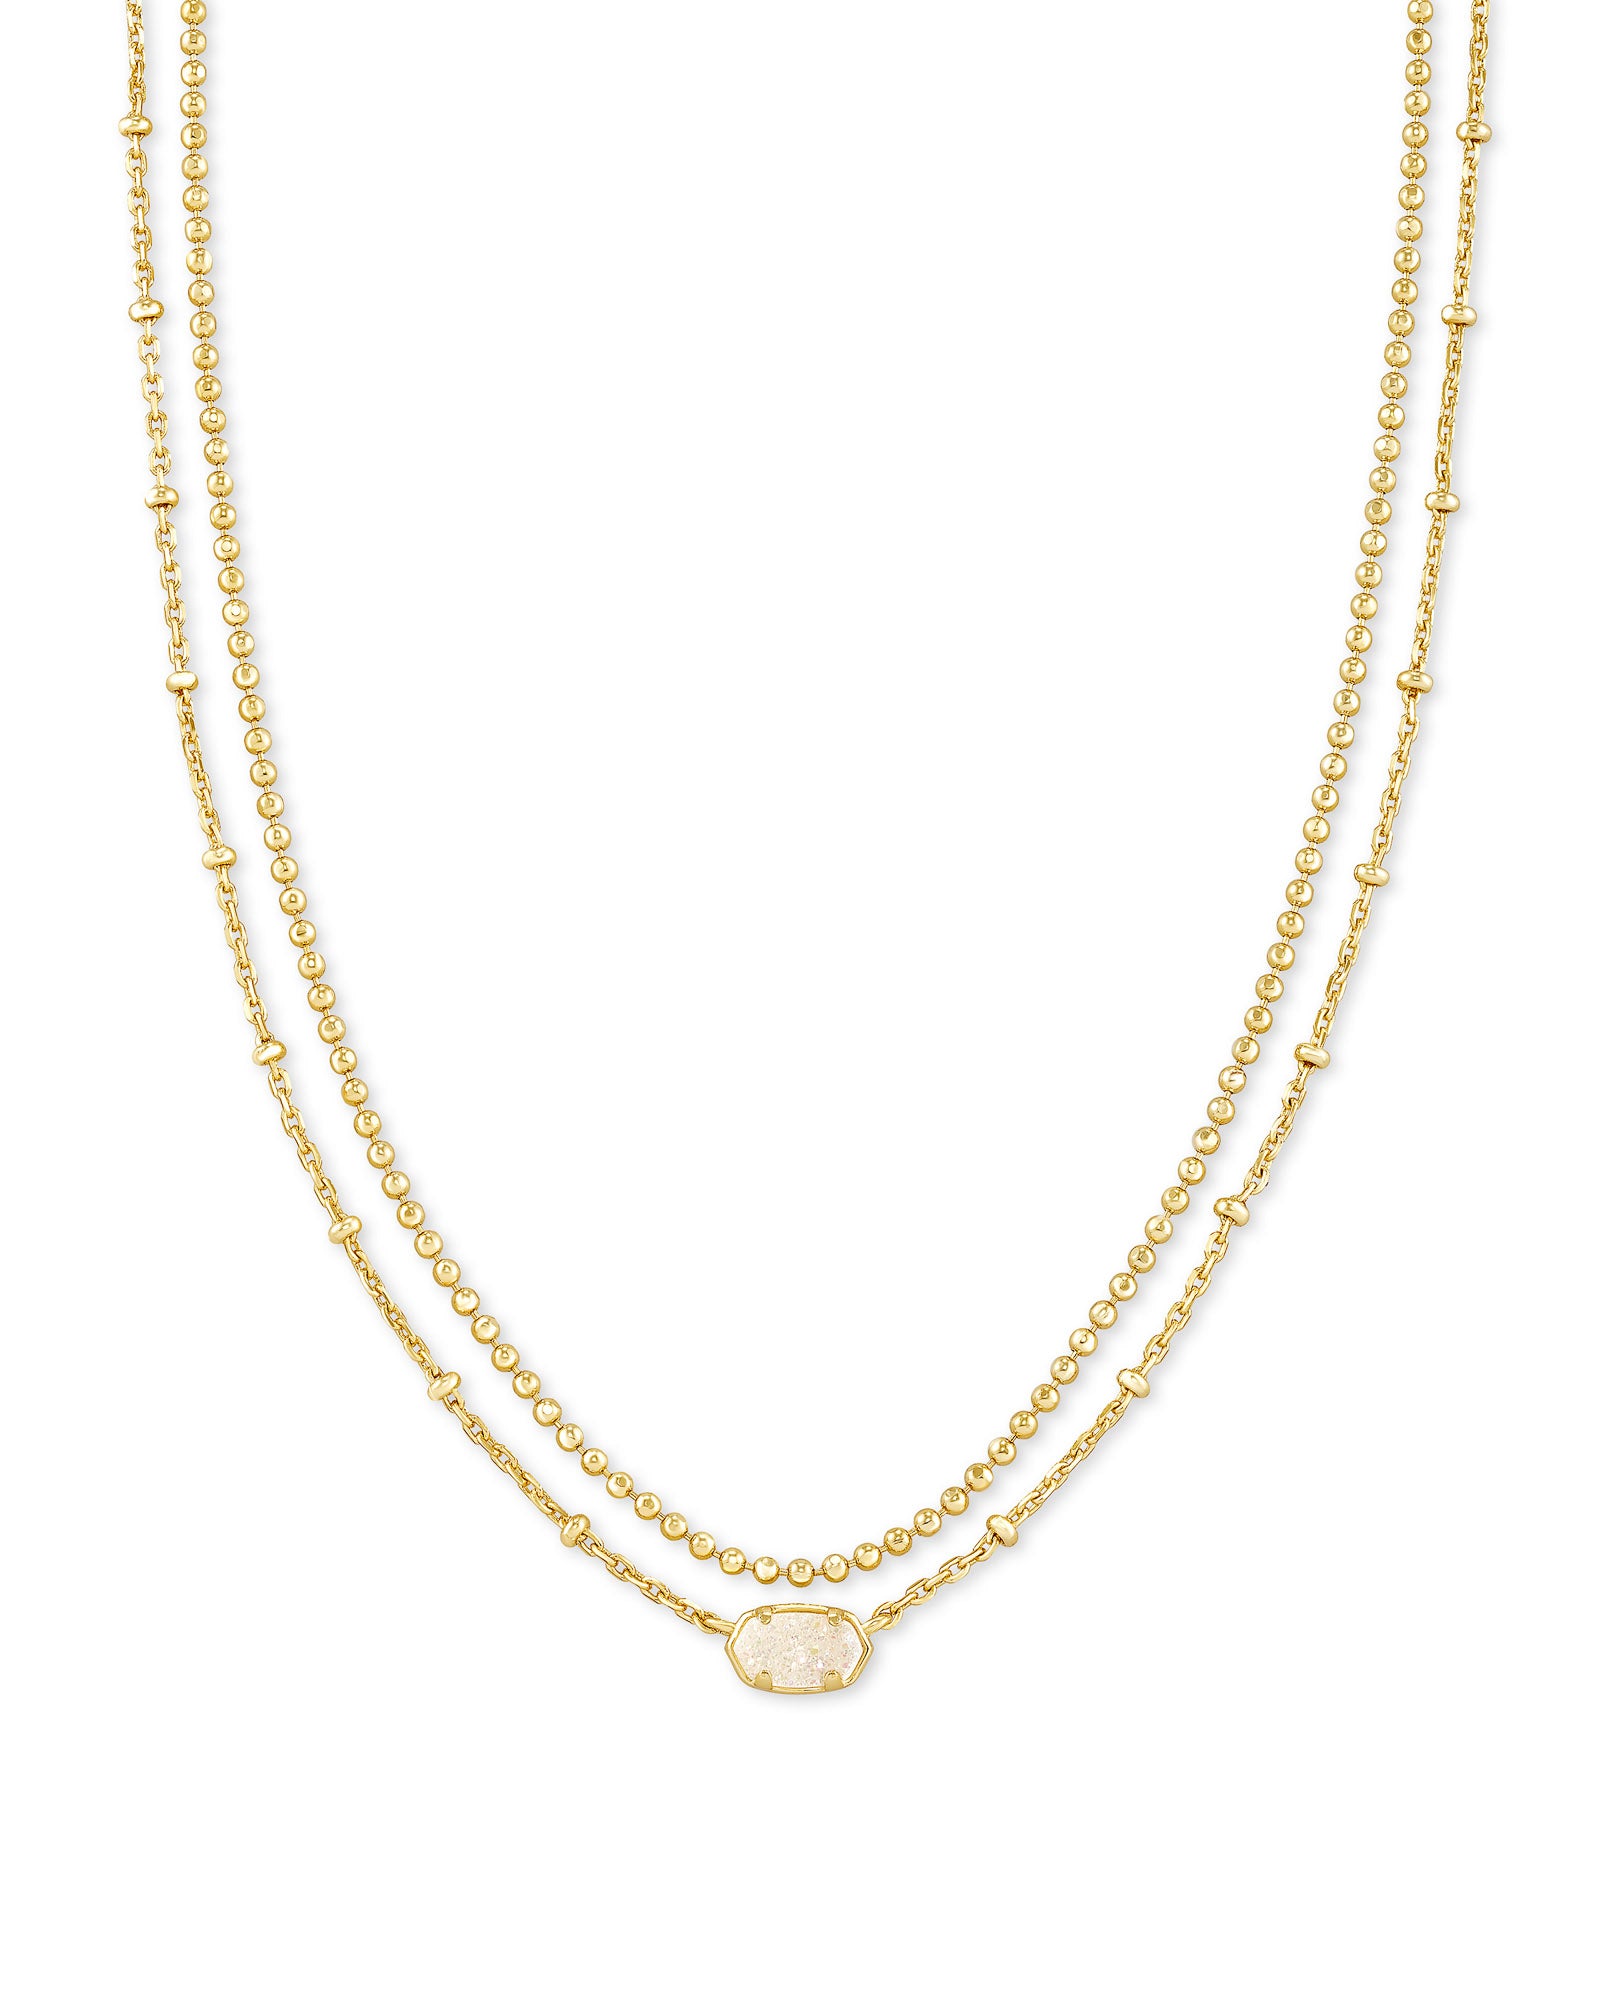 Emilie Multi Strand Necklace in Gold Iridescent Drusy